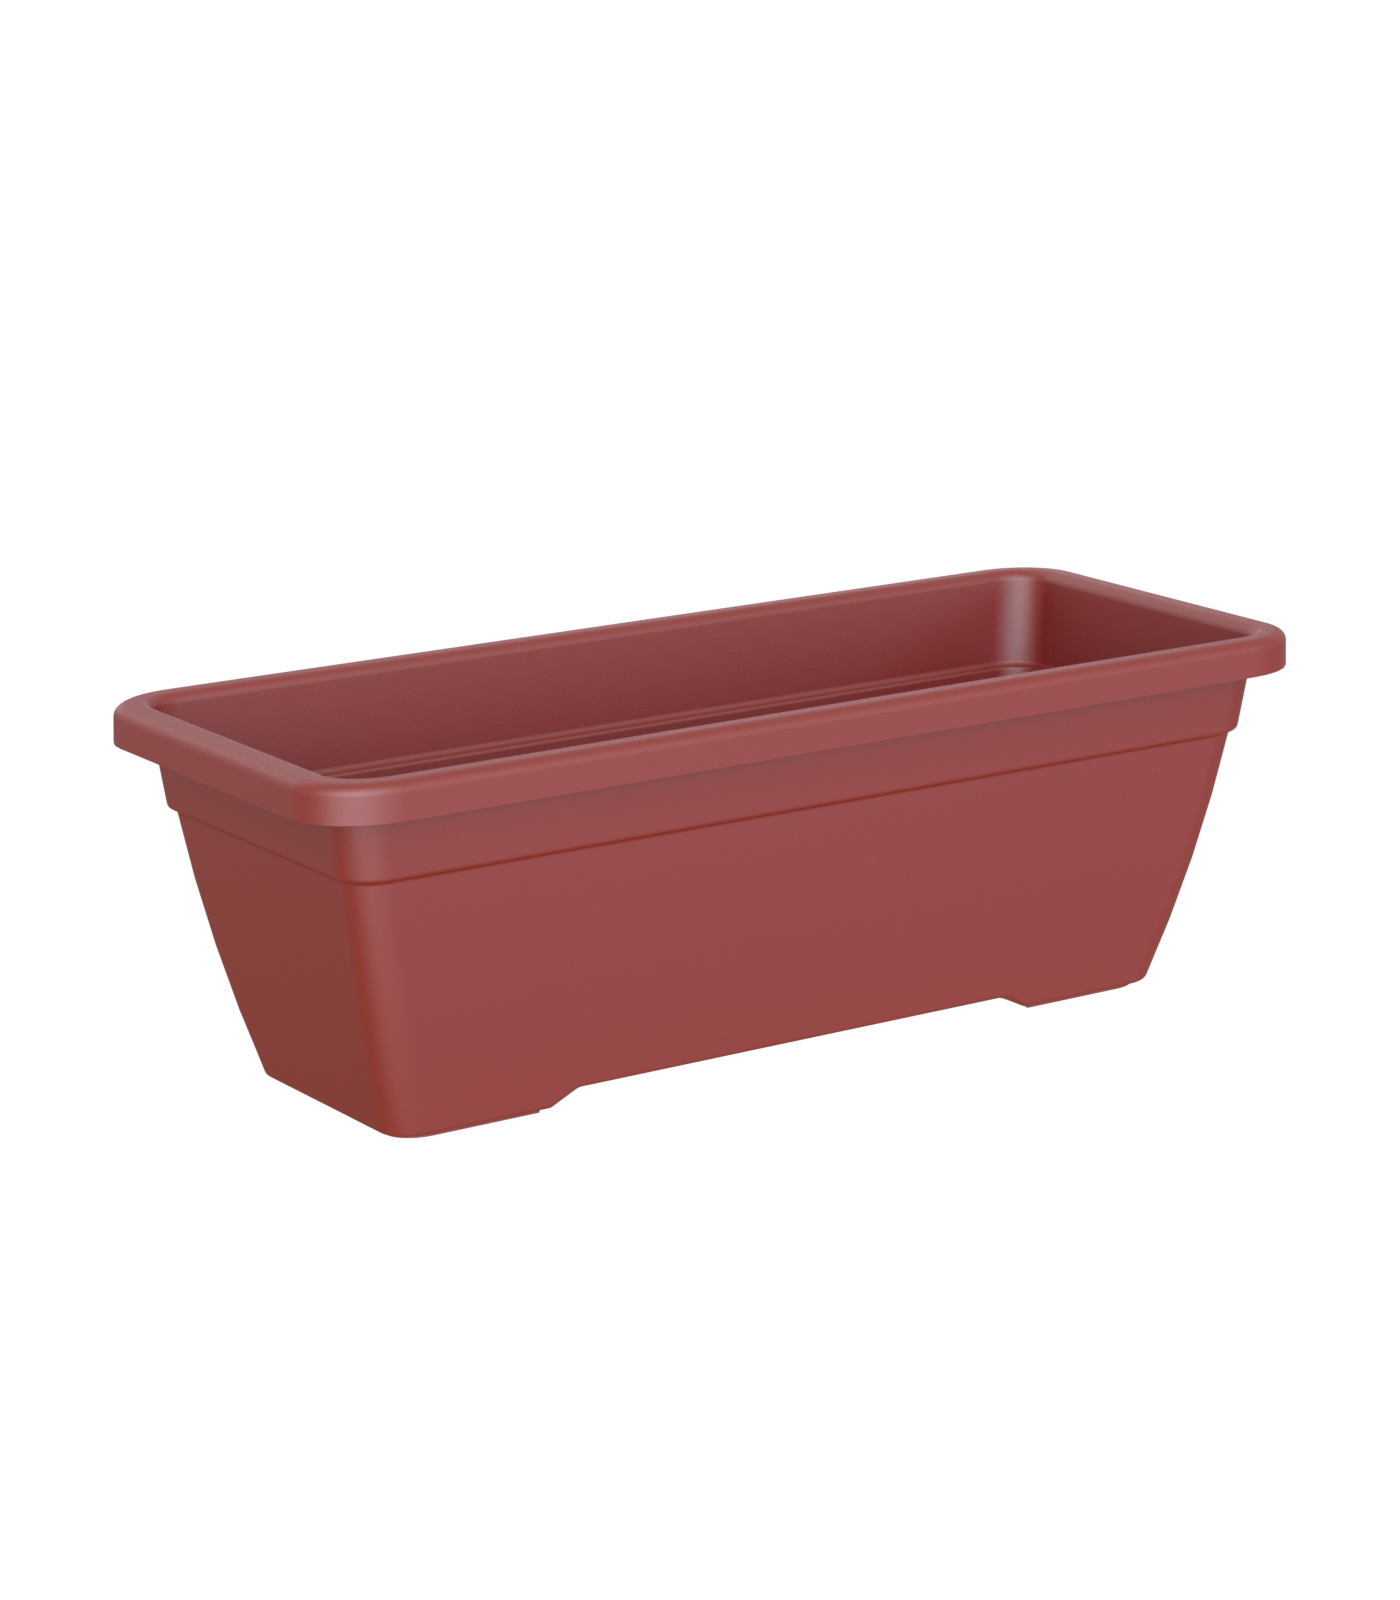 plastic-pot-recyclable-plantbox-red